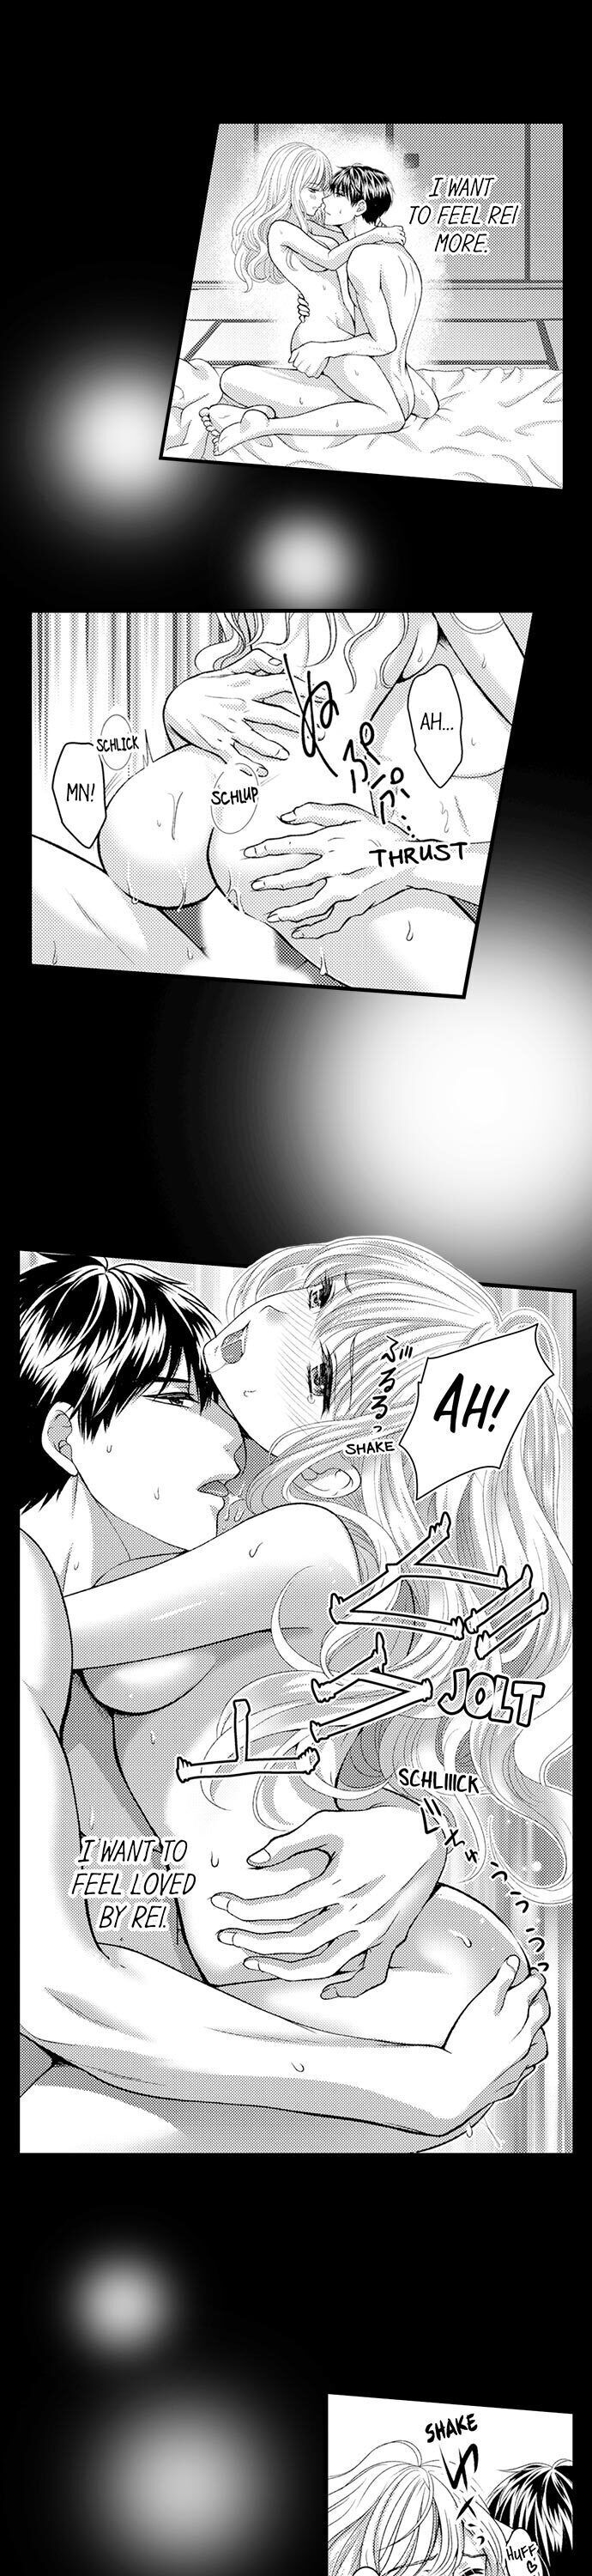 Cheating in a One-Sided Relationship - Chapter 15 Page 8